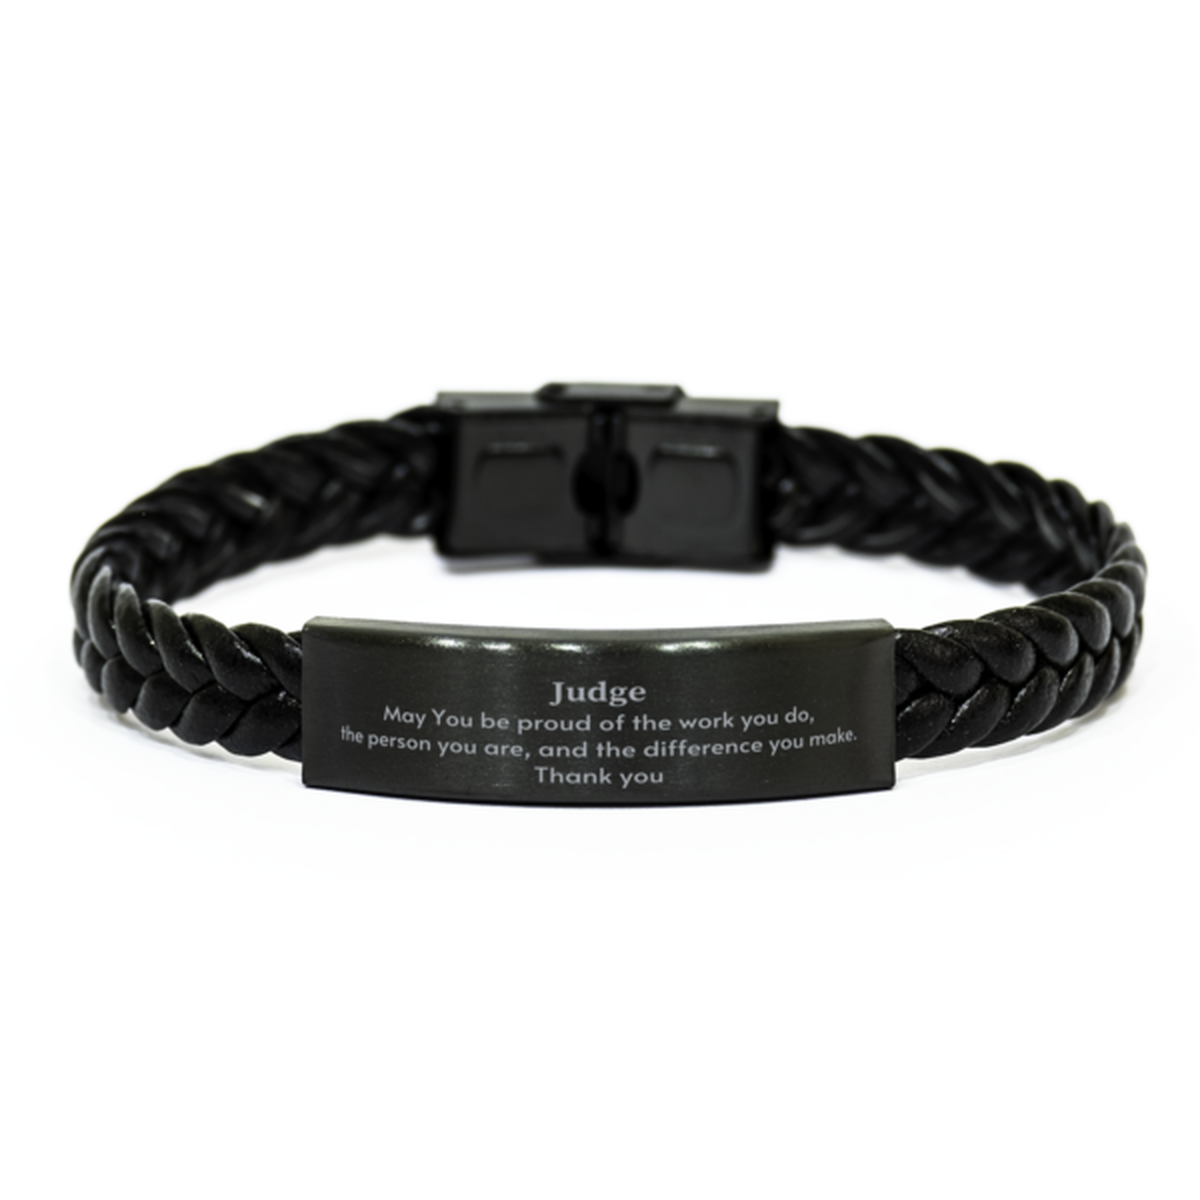 Heartwarming Braided Leather Bracelet Retirement Coworkers Gifts for Judge, Judge May You be proud of the work you do, the person you are Gifts for Boss Men Women Friends